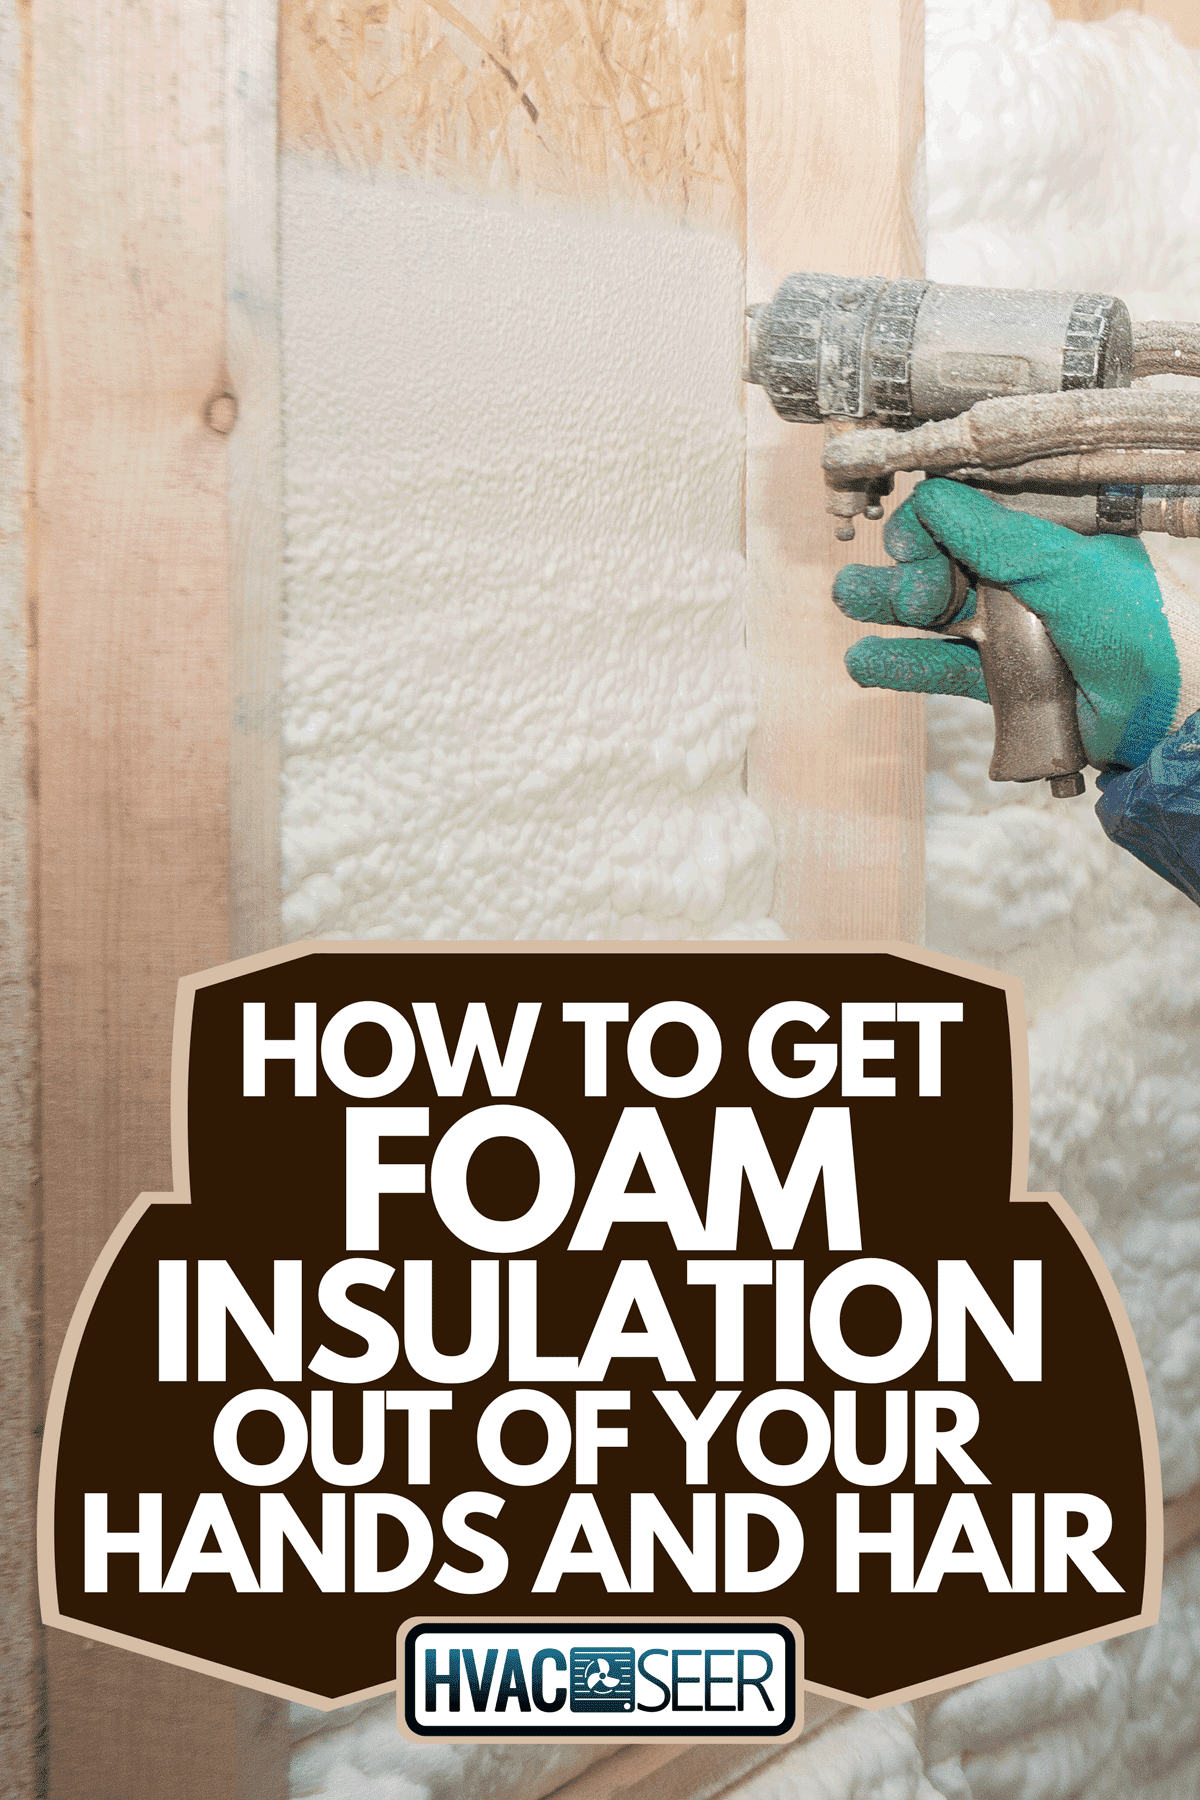 A man applies spray foam insulation on wall, How To Get Foam Insulation Out Of Your Hands And Hair